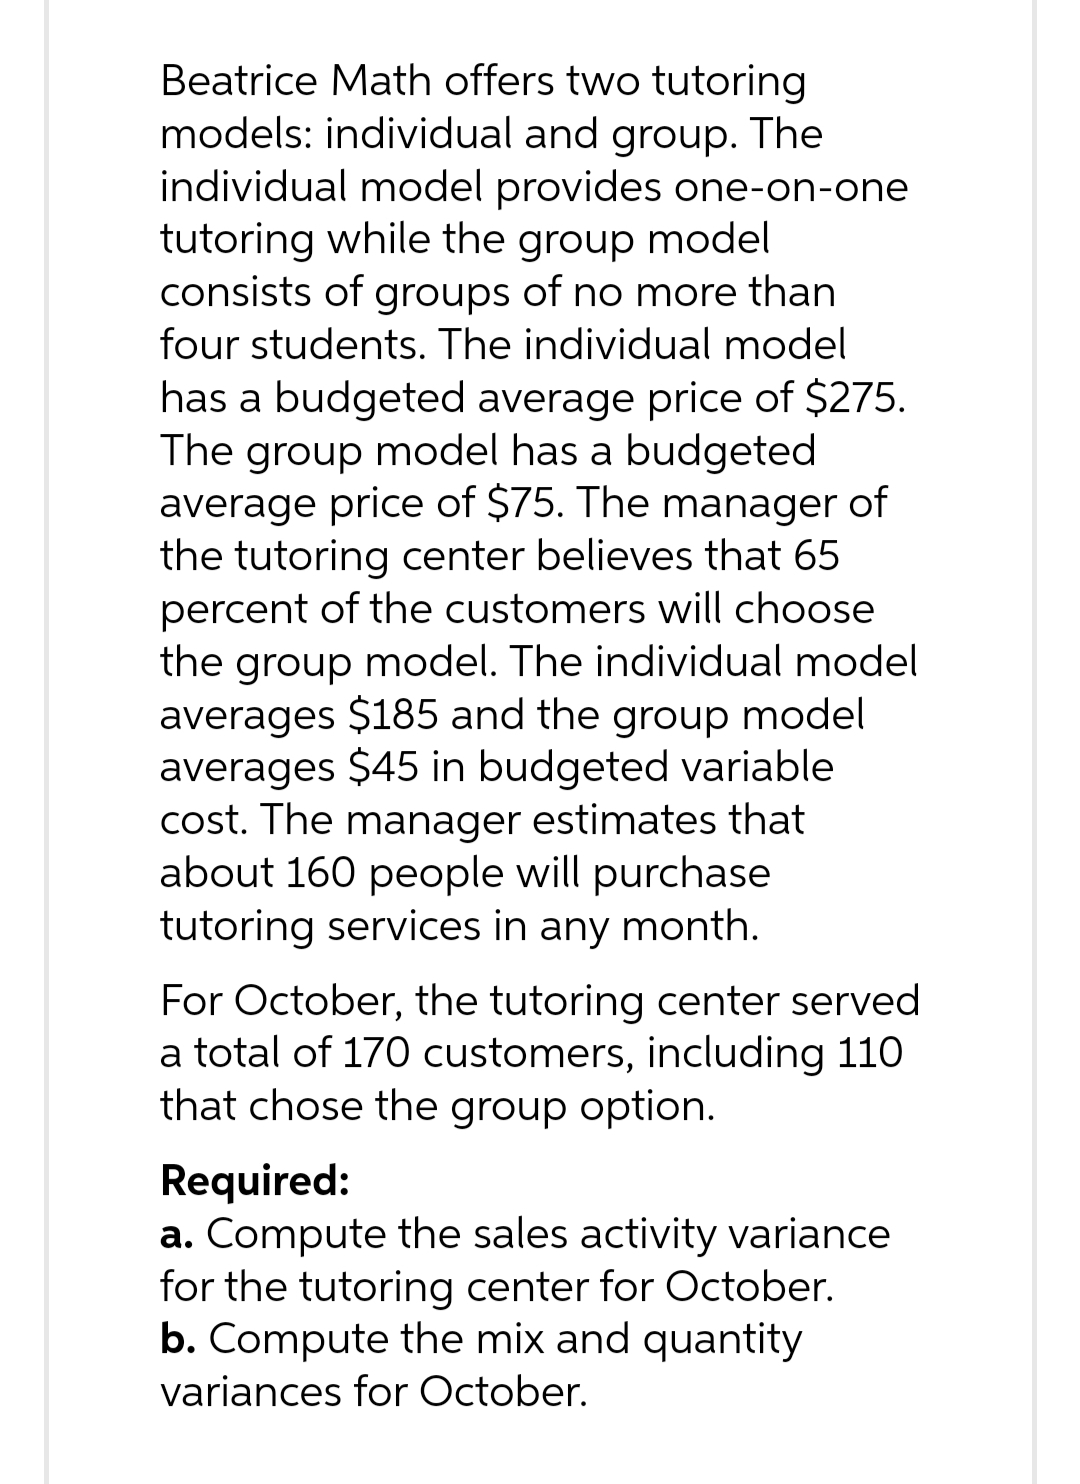 Beatrice Math offers two tutoring
models: individual and group. The
individual model provides one-on-one
tutoring while the group model
consists of groups of no more than
four students. The individual model
has a budgeted average price of $275.
The group model has a budgeted
average price of $75. The manager of
the tutoring center believes that 65
percent of the customers will choose
the group model. The individual model
averages $185 and the group model
averages $45 in budgeted variable
cost. The manager estimates that
about 160 people will purchase
tutoring services in any month.
For October, the tutoring center served
a total of 170 customers, including 110
that chose the group option.
Required:
a. Compute the sales activity variance
for the tutoring center for October.
b. Compute the mix and quantity
variances for October.